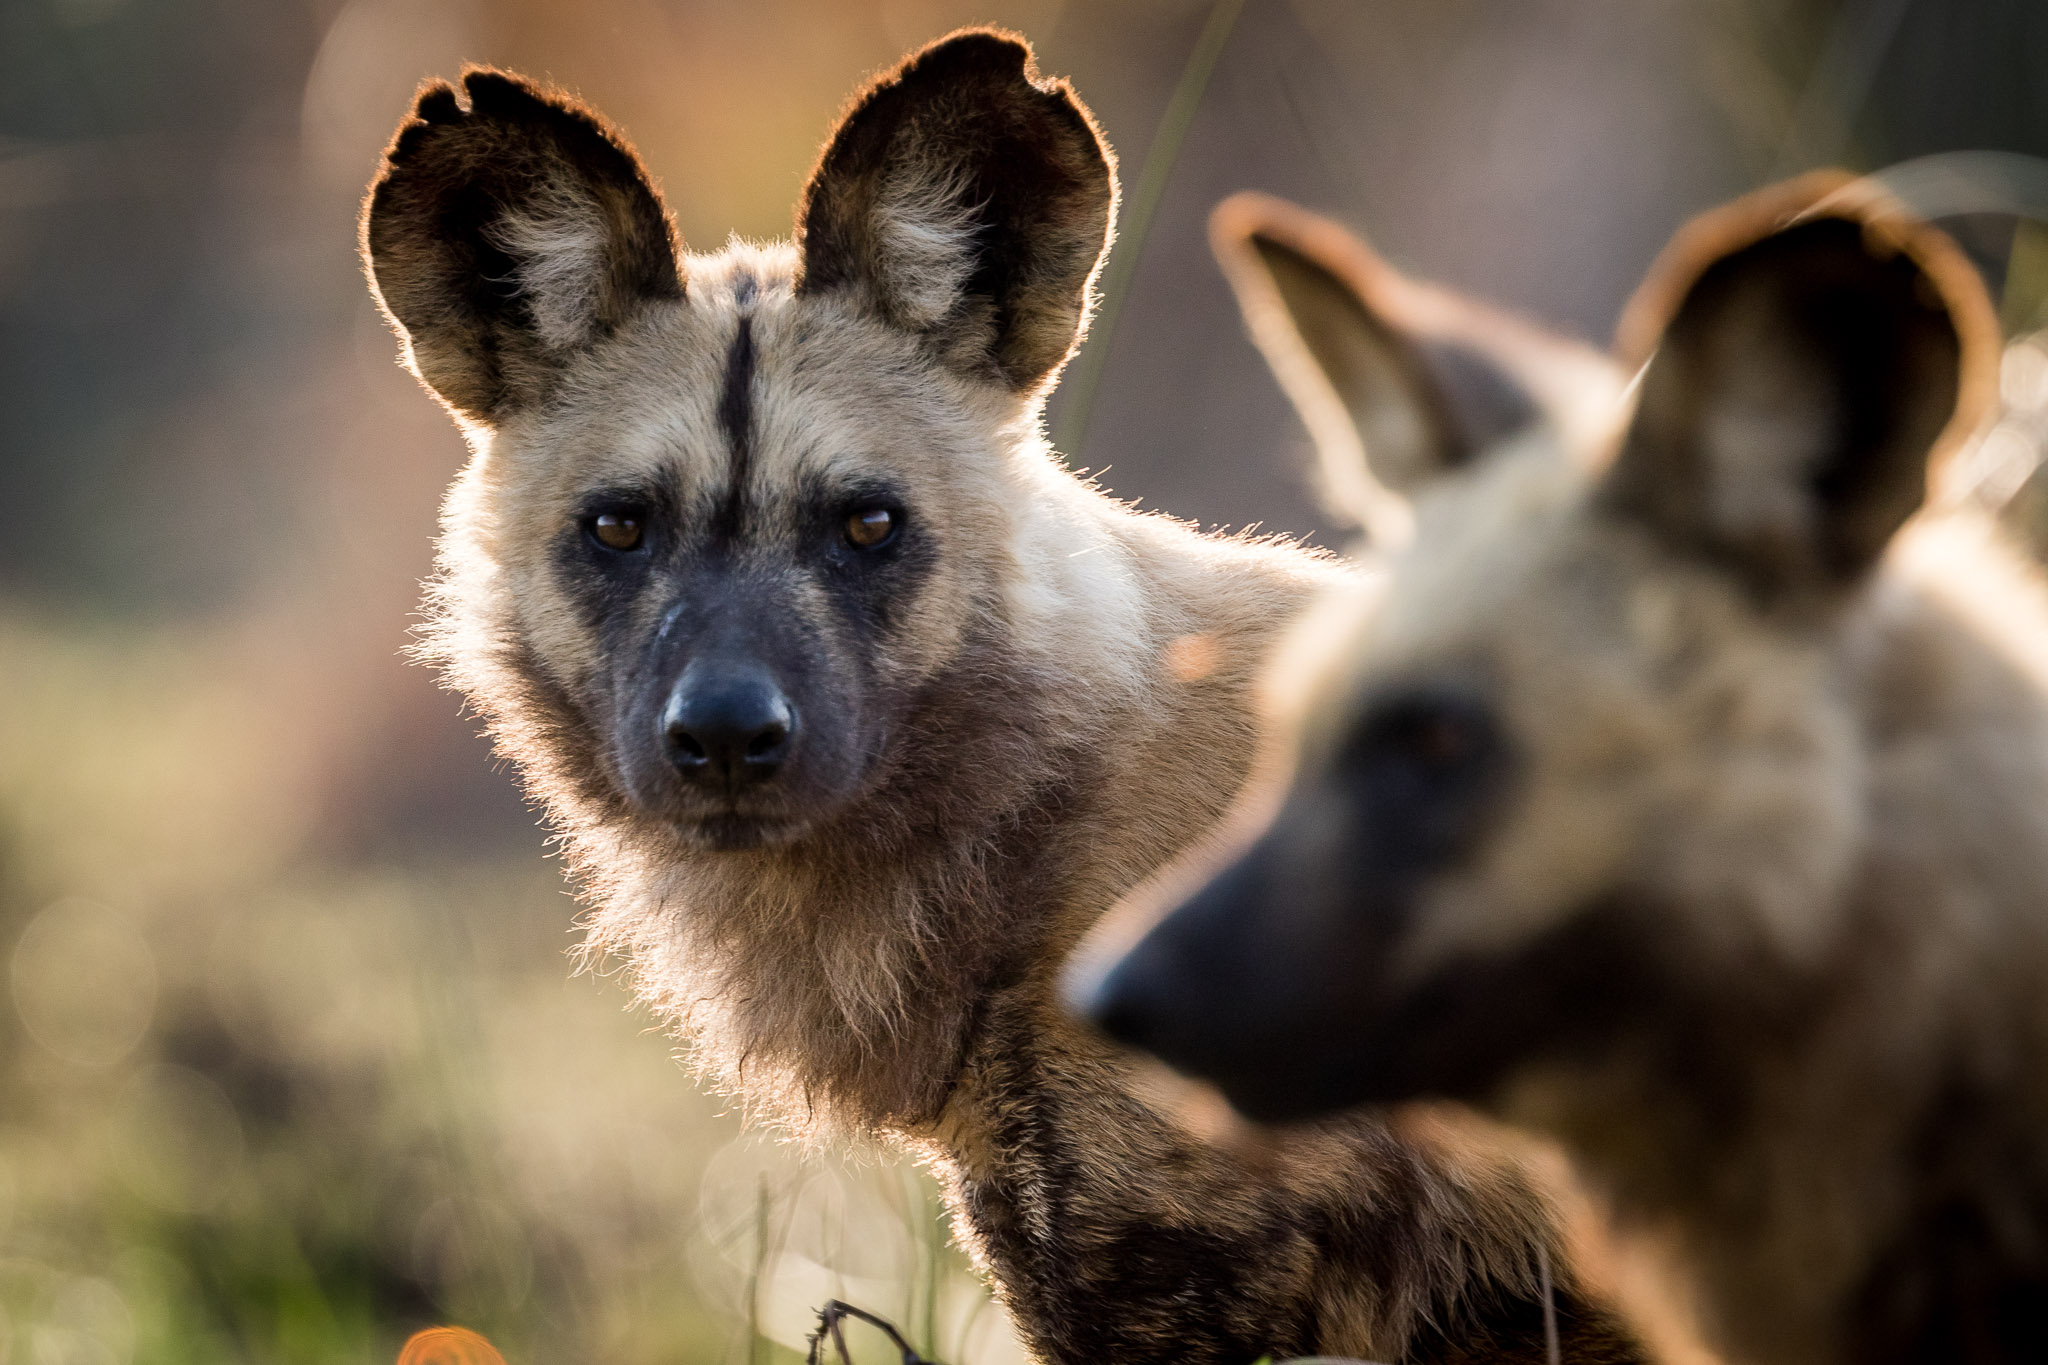 African Wild Dogs in Moremi